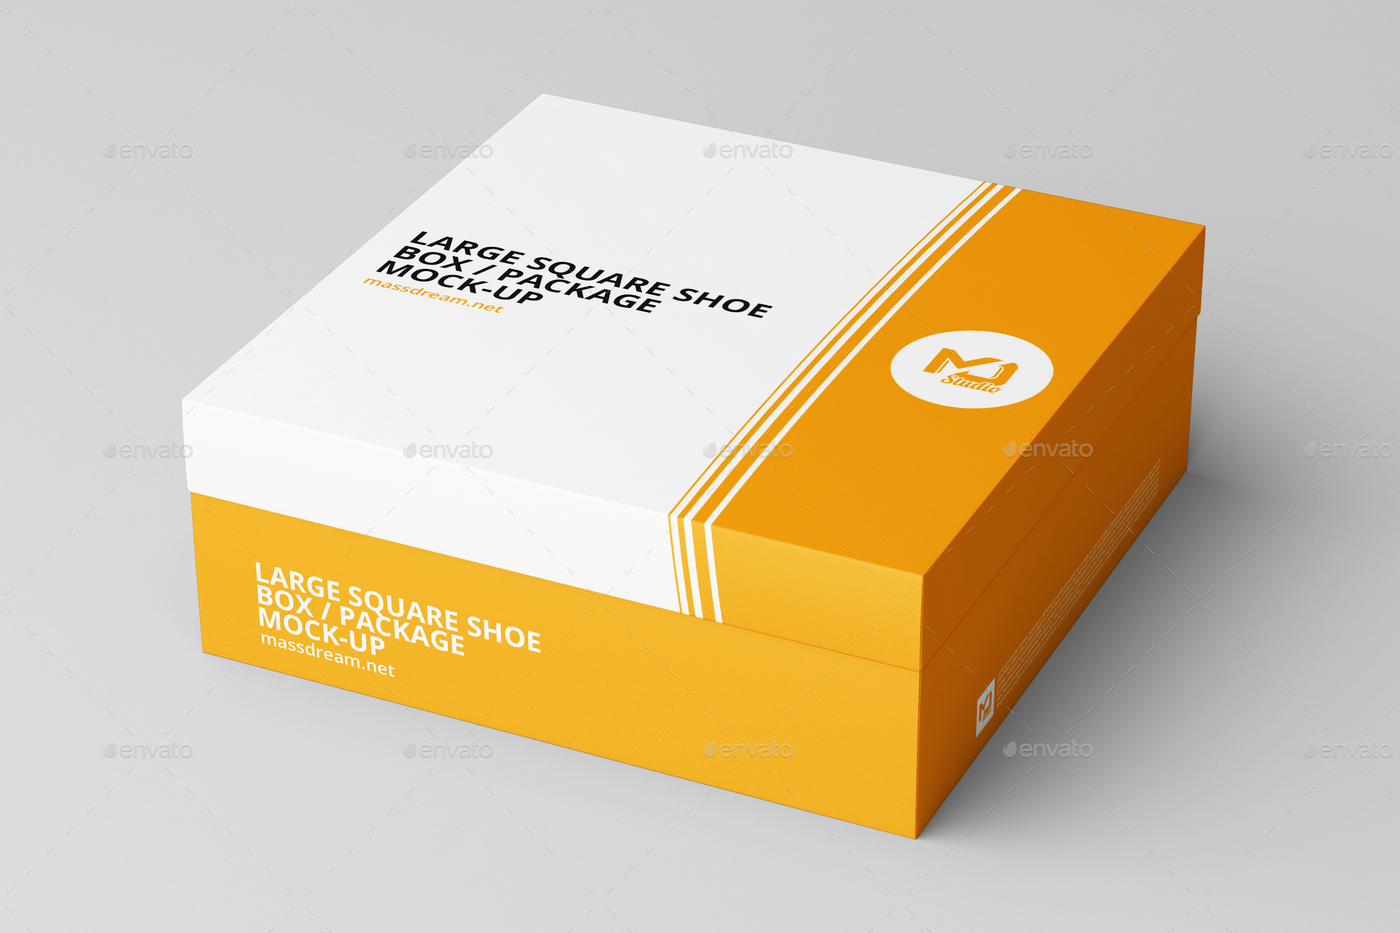 Download Free 67 Premium Free Psd Packaging Mockups For Business And Creativity Free Psd Templates PSD Mockups.